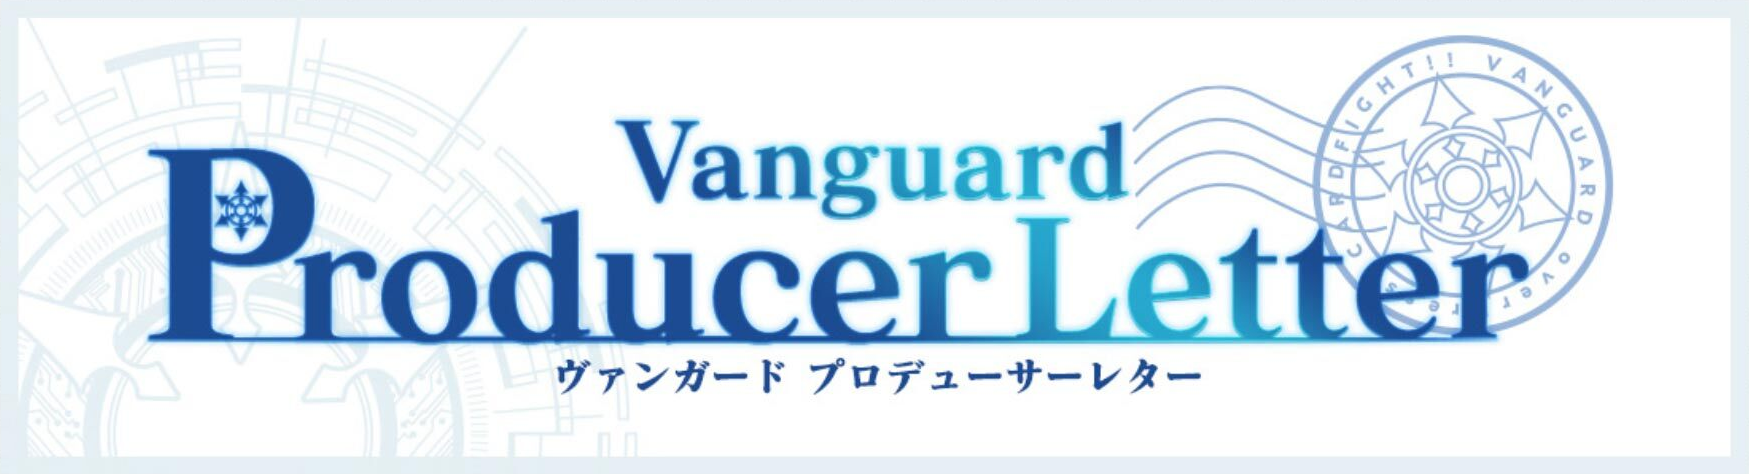 Cardfight!! Vanguard Producer's Letter／カードファイト!! ヴァンガード・プロデューサーレター